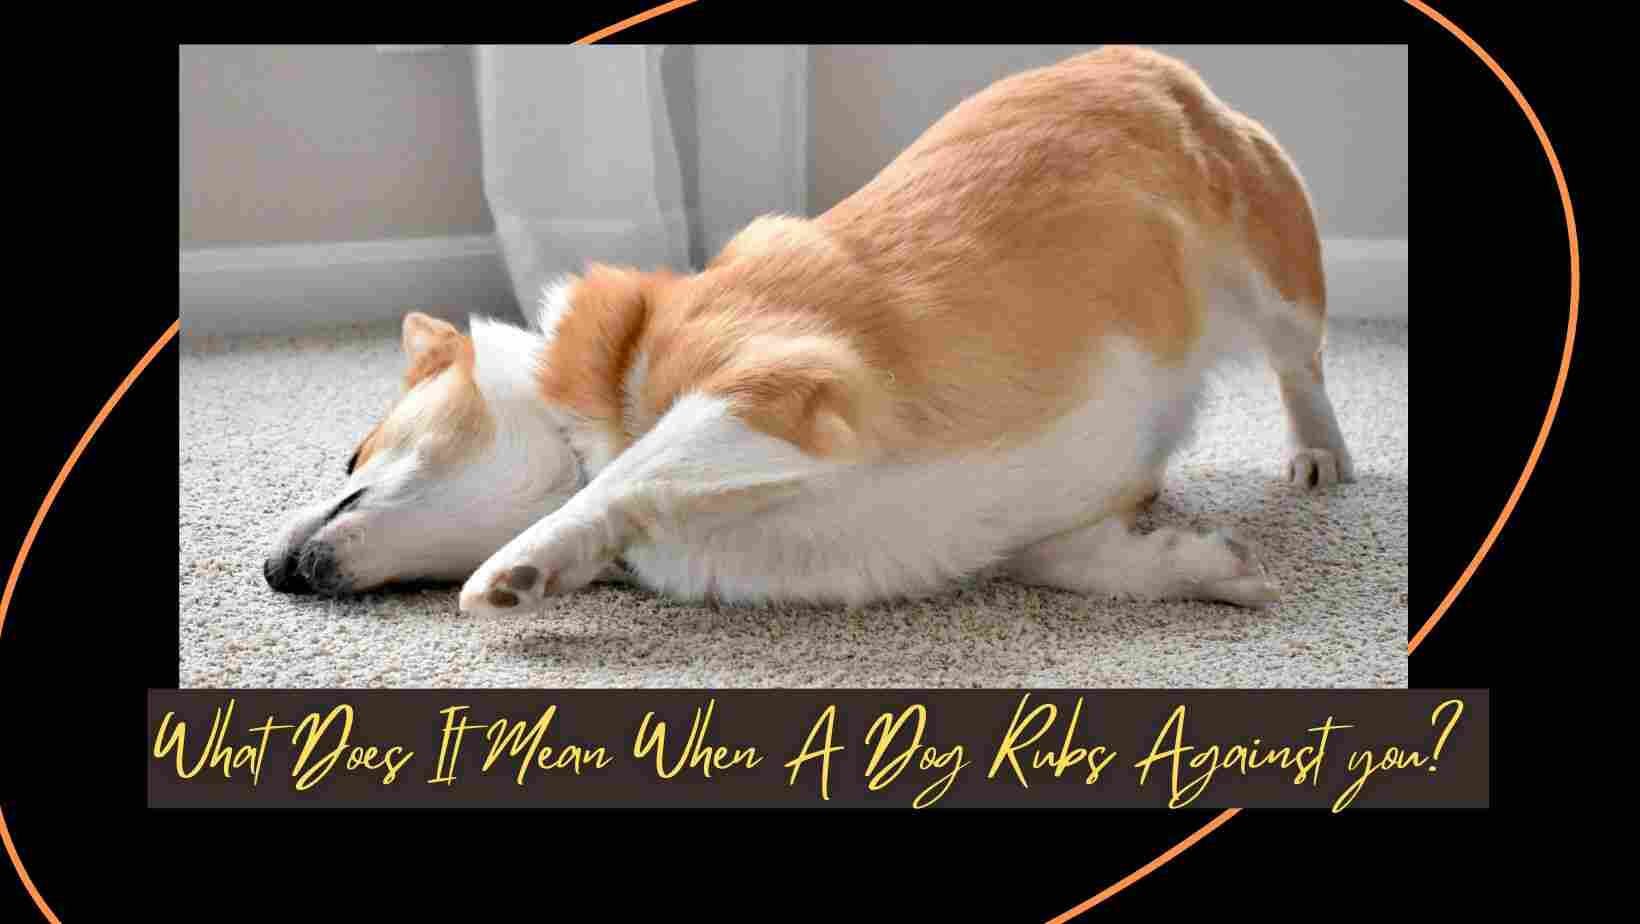 What Does It Mean When A Dog Rubs Against you?